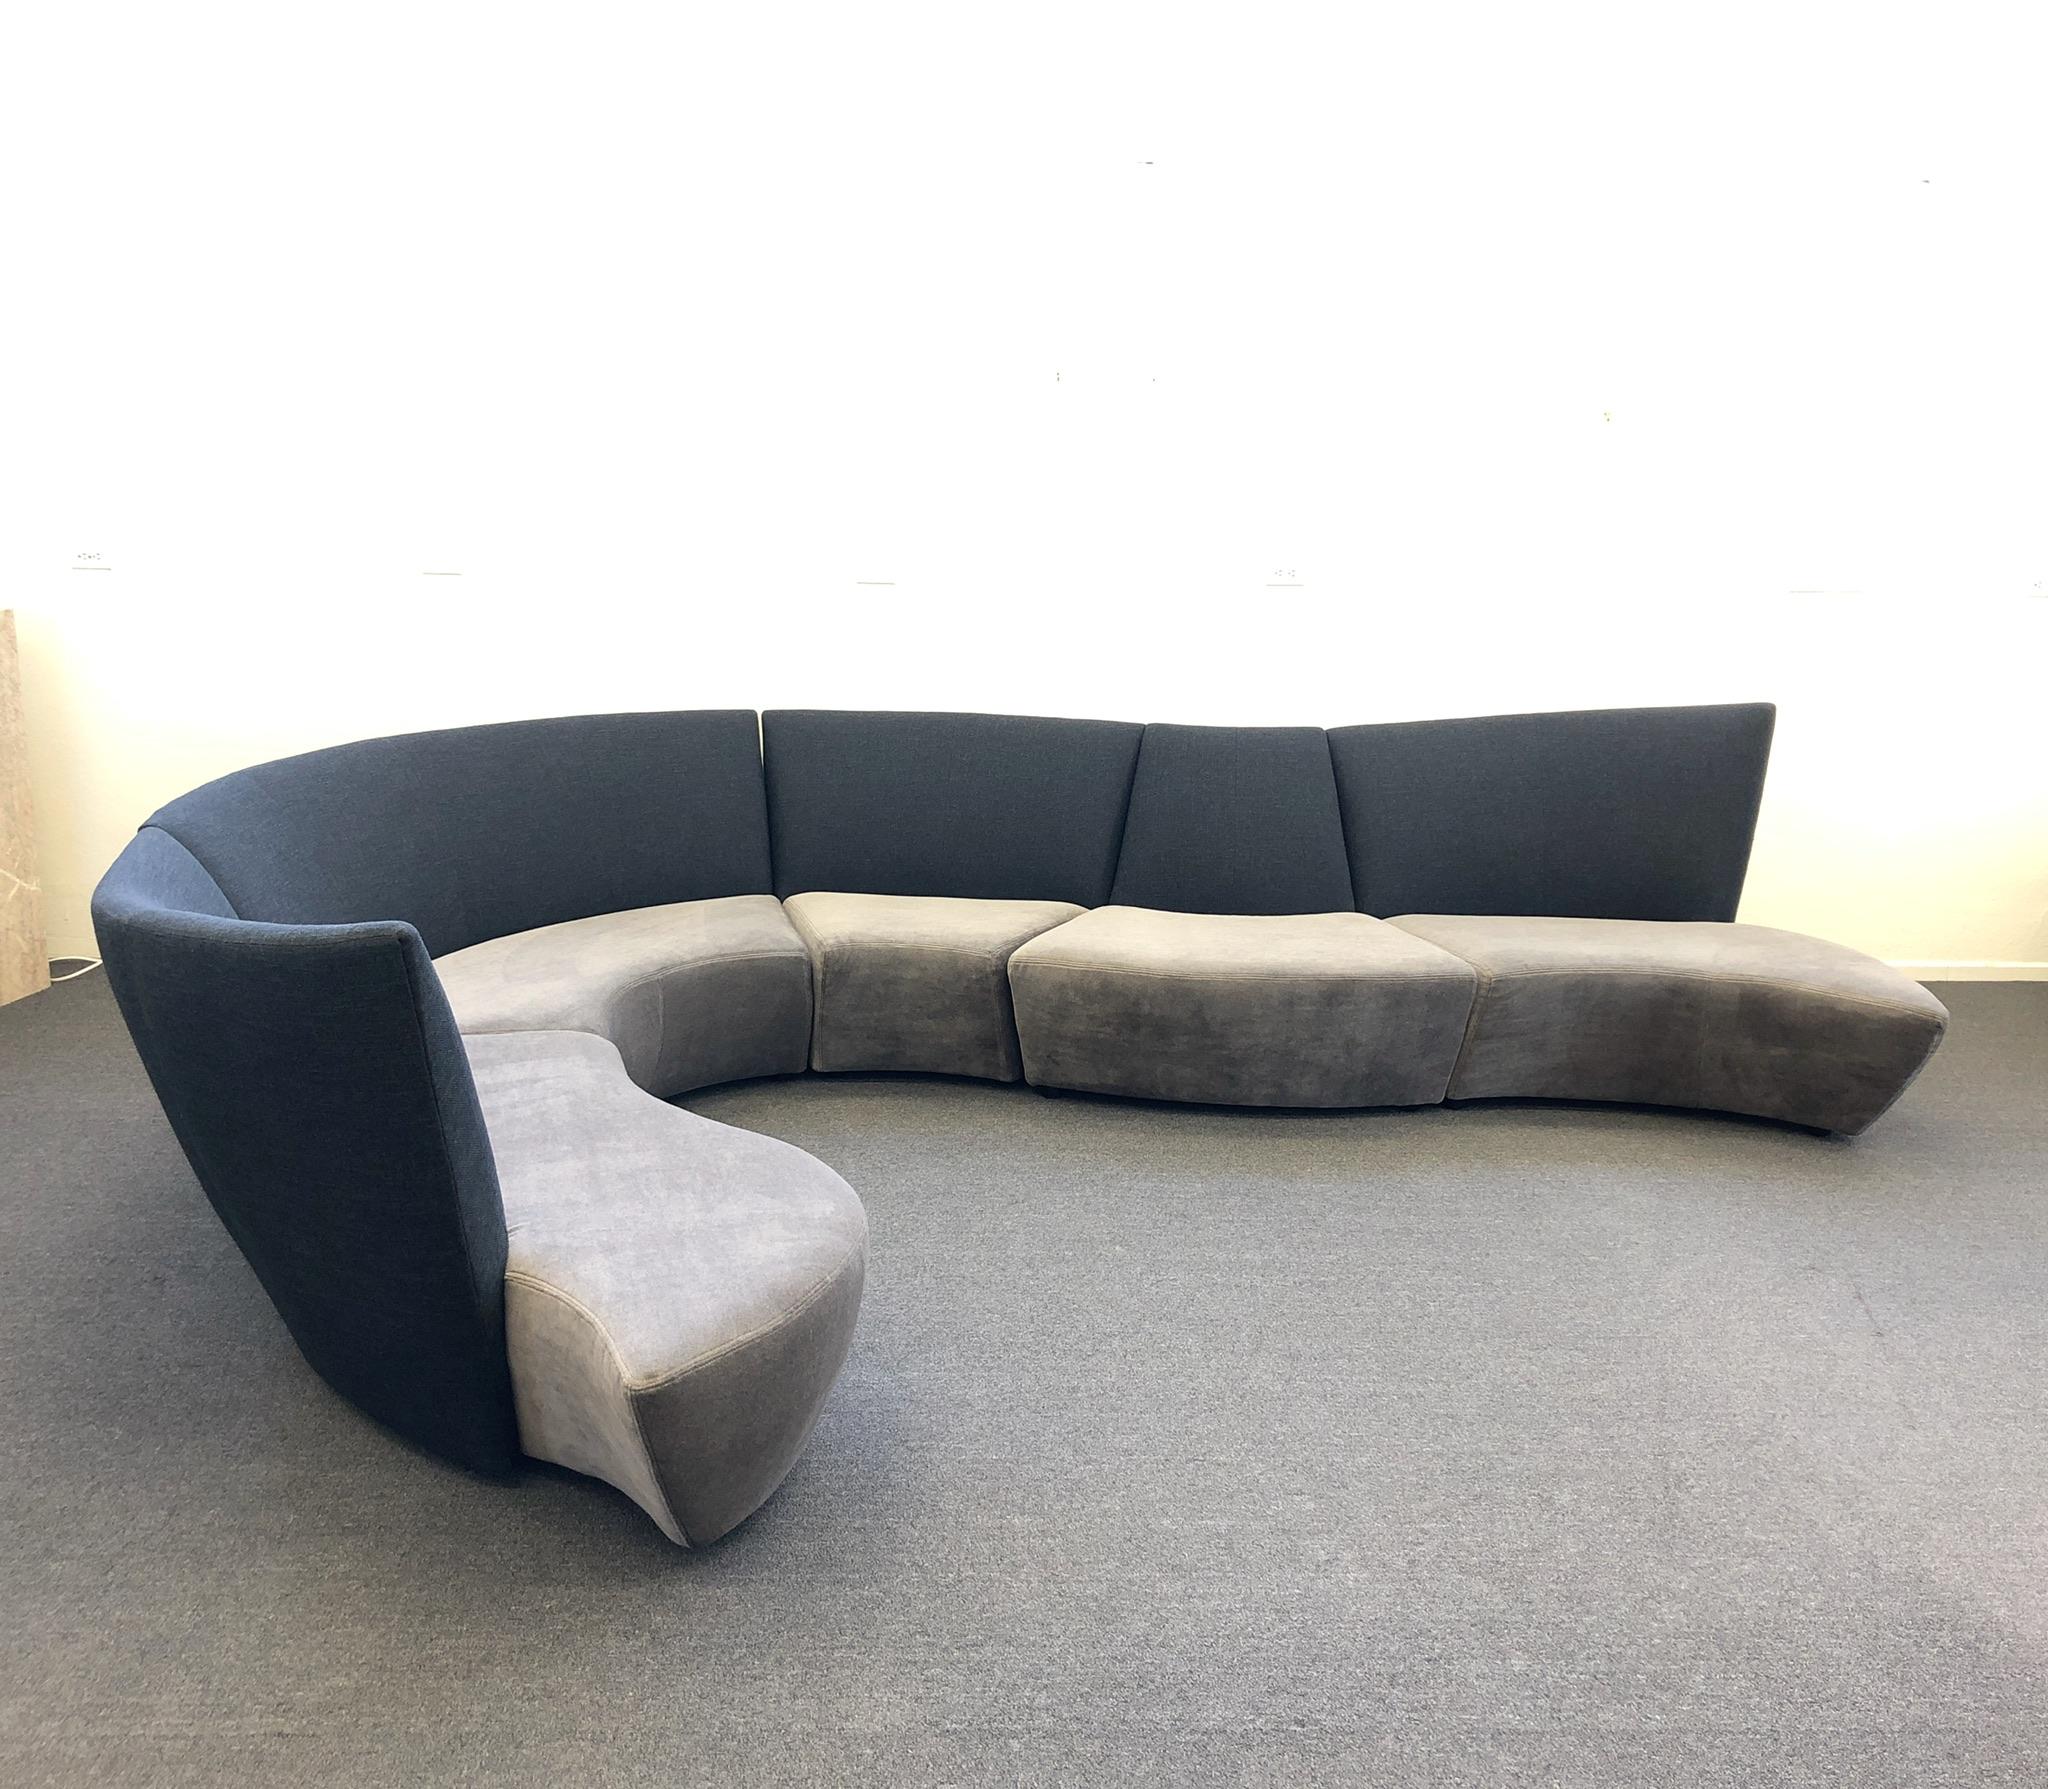 Five-Piece Sectional Sofa by Vladimir Kagan for Preview 3